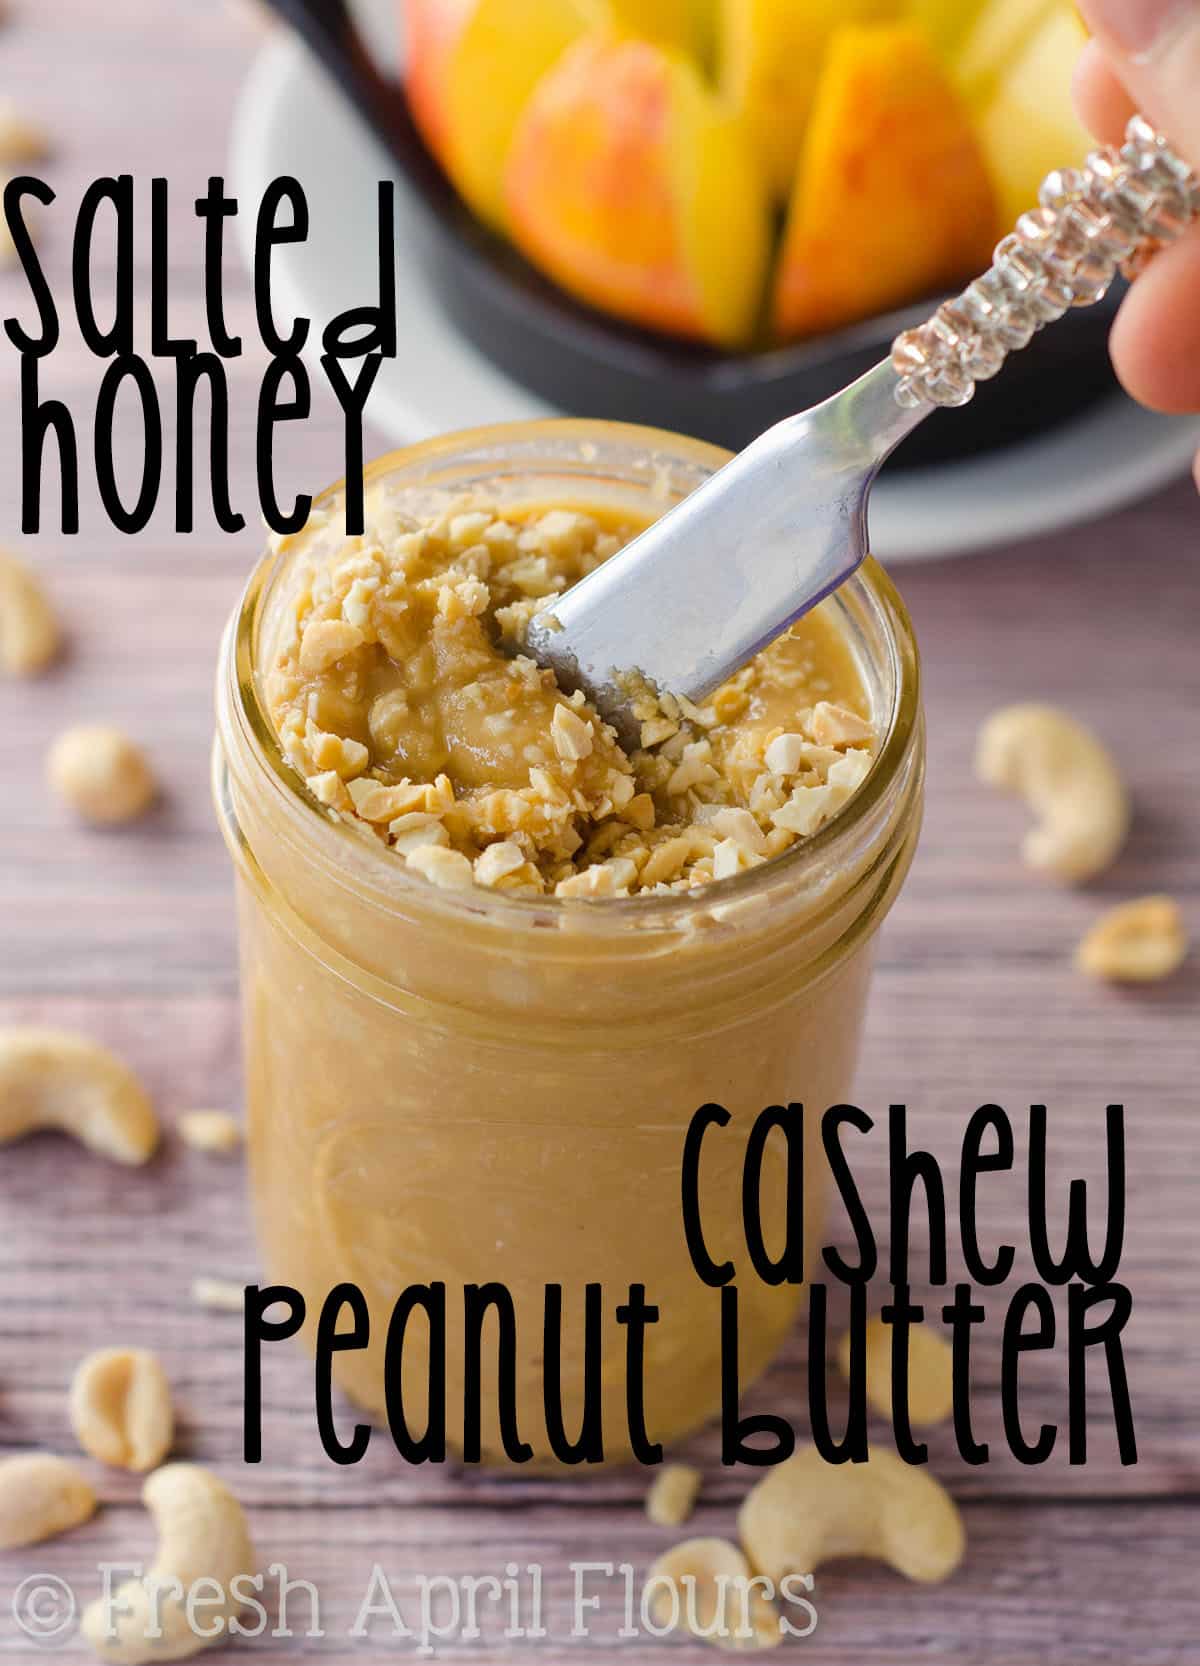 Sweet & salty, naturally buttery homemade spread. You're just 4 ingredients and a few minutes away from enjoying your new favorite homemade nut butter! via @frshaprilflours